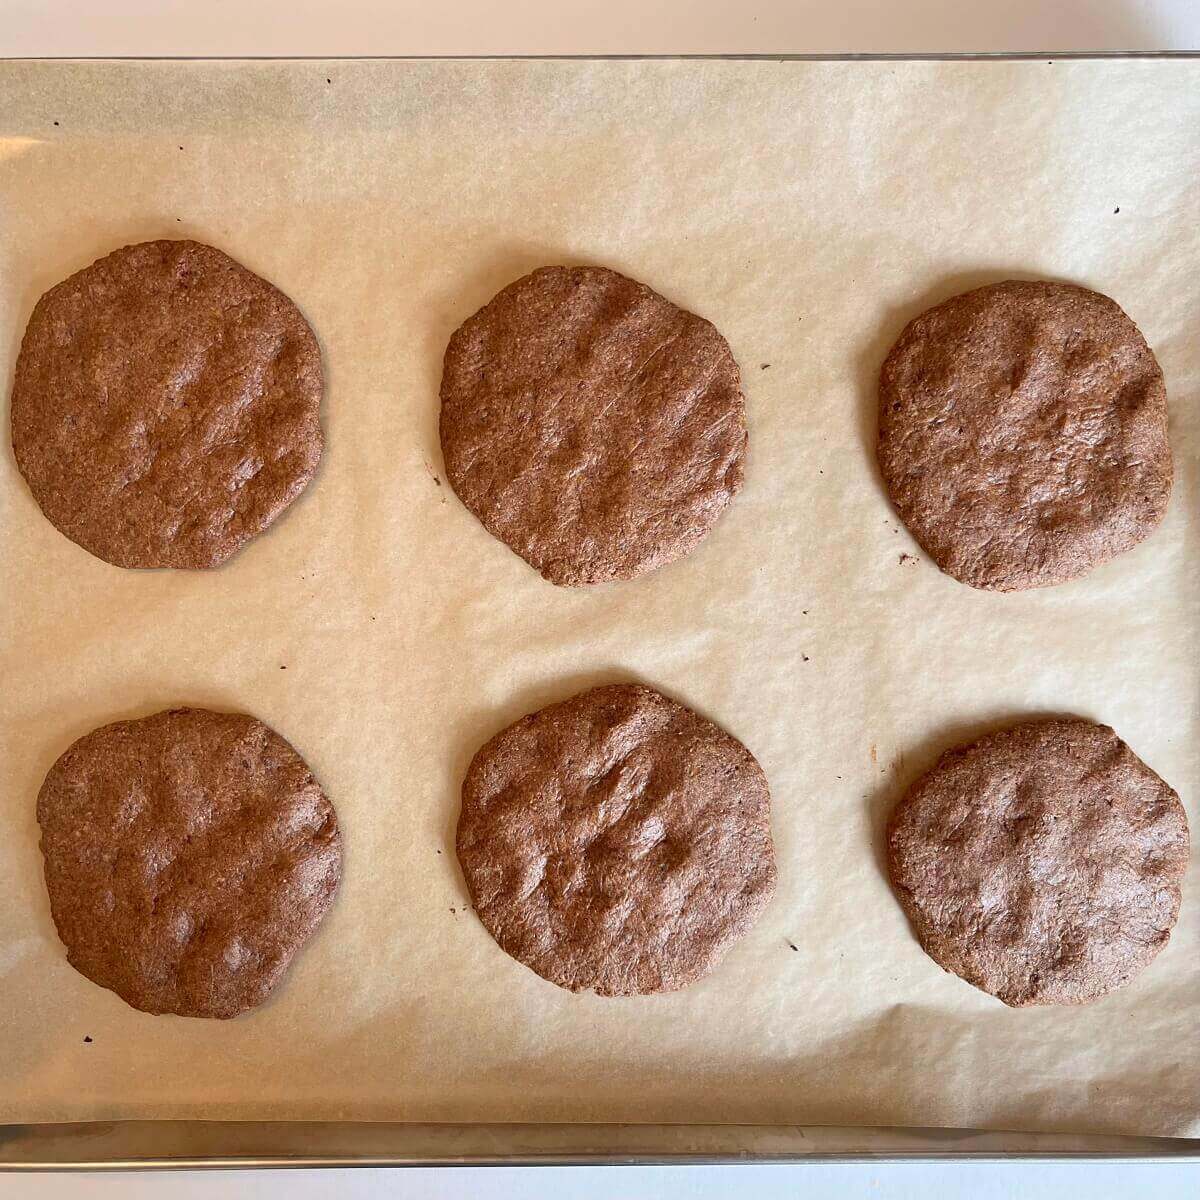 Freshly baked flax cookies on a sheet pan.